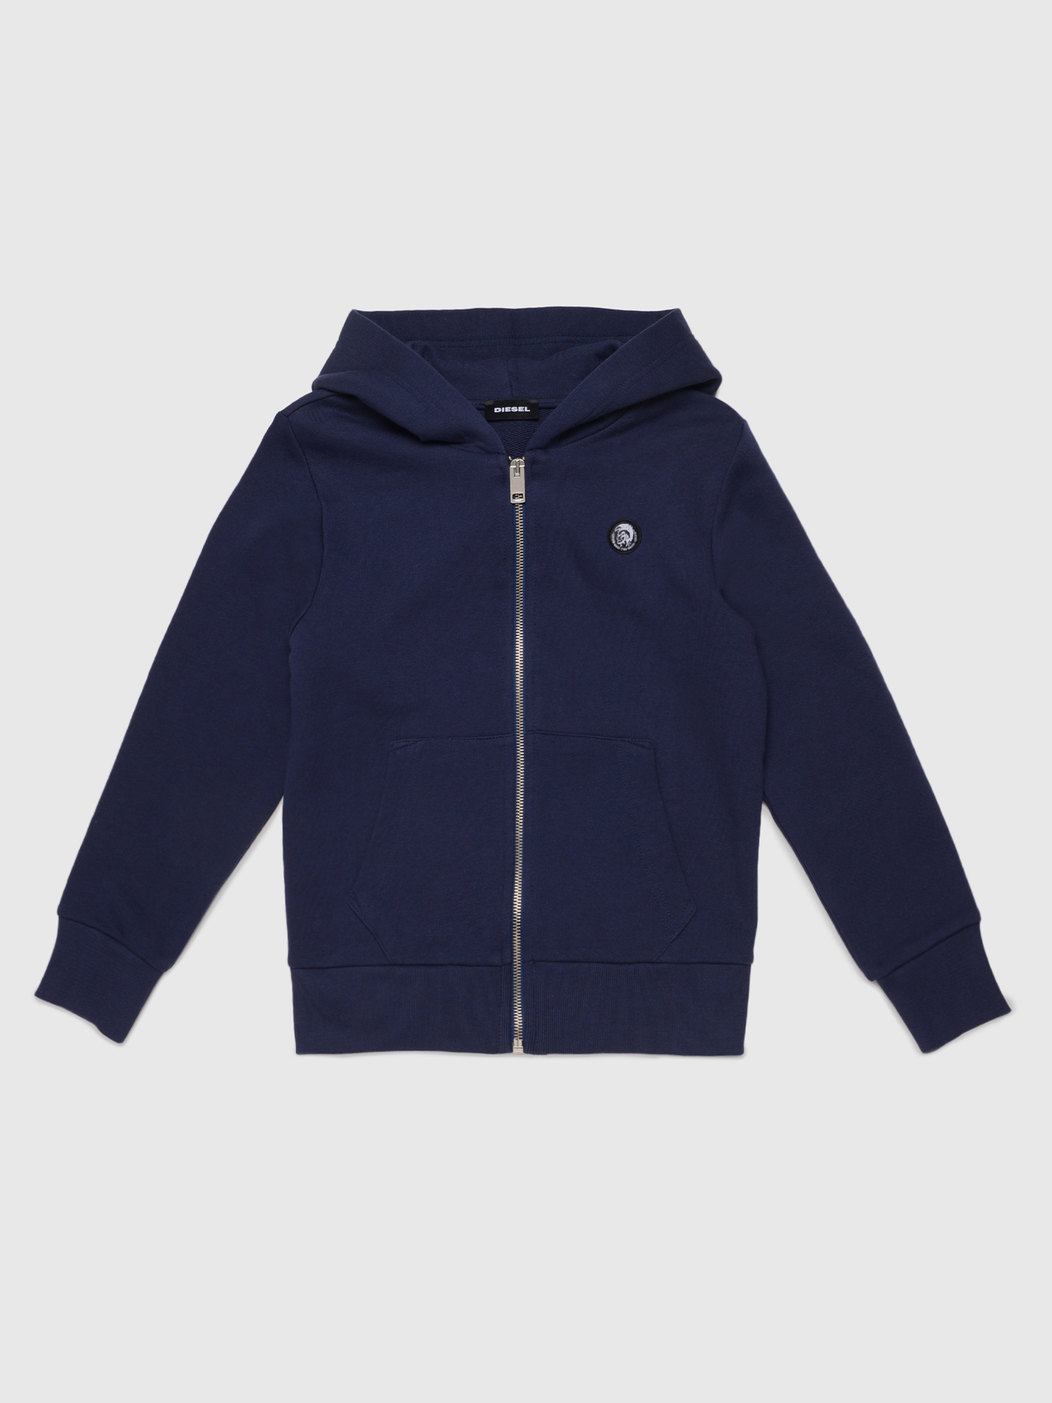 KIDS ZIPPED HOODIE WITH MOHAWK PATCH